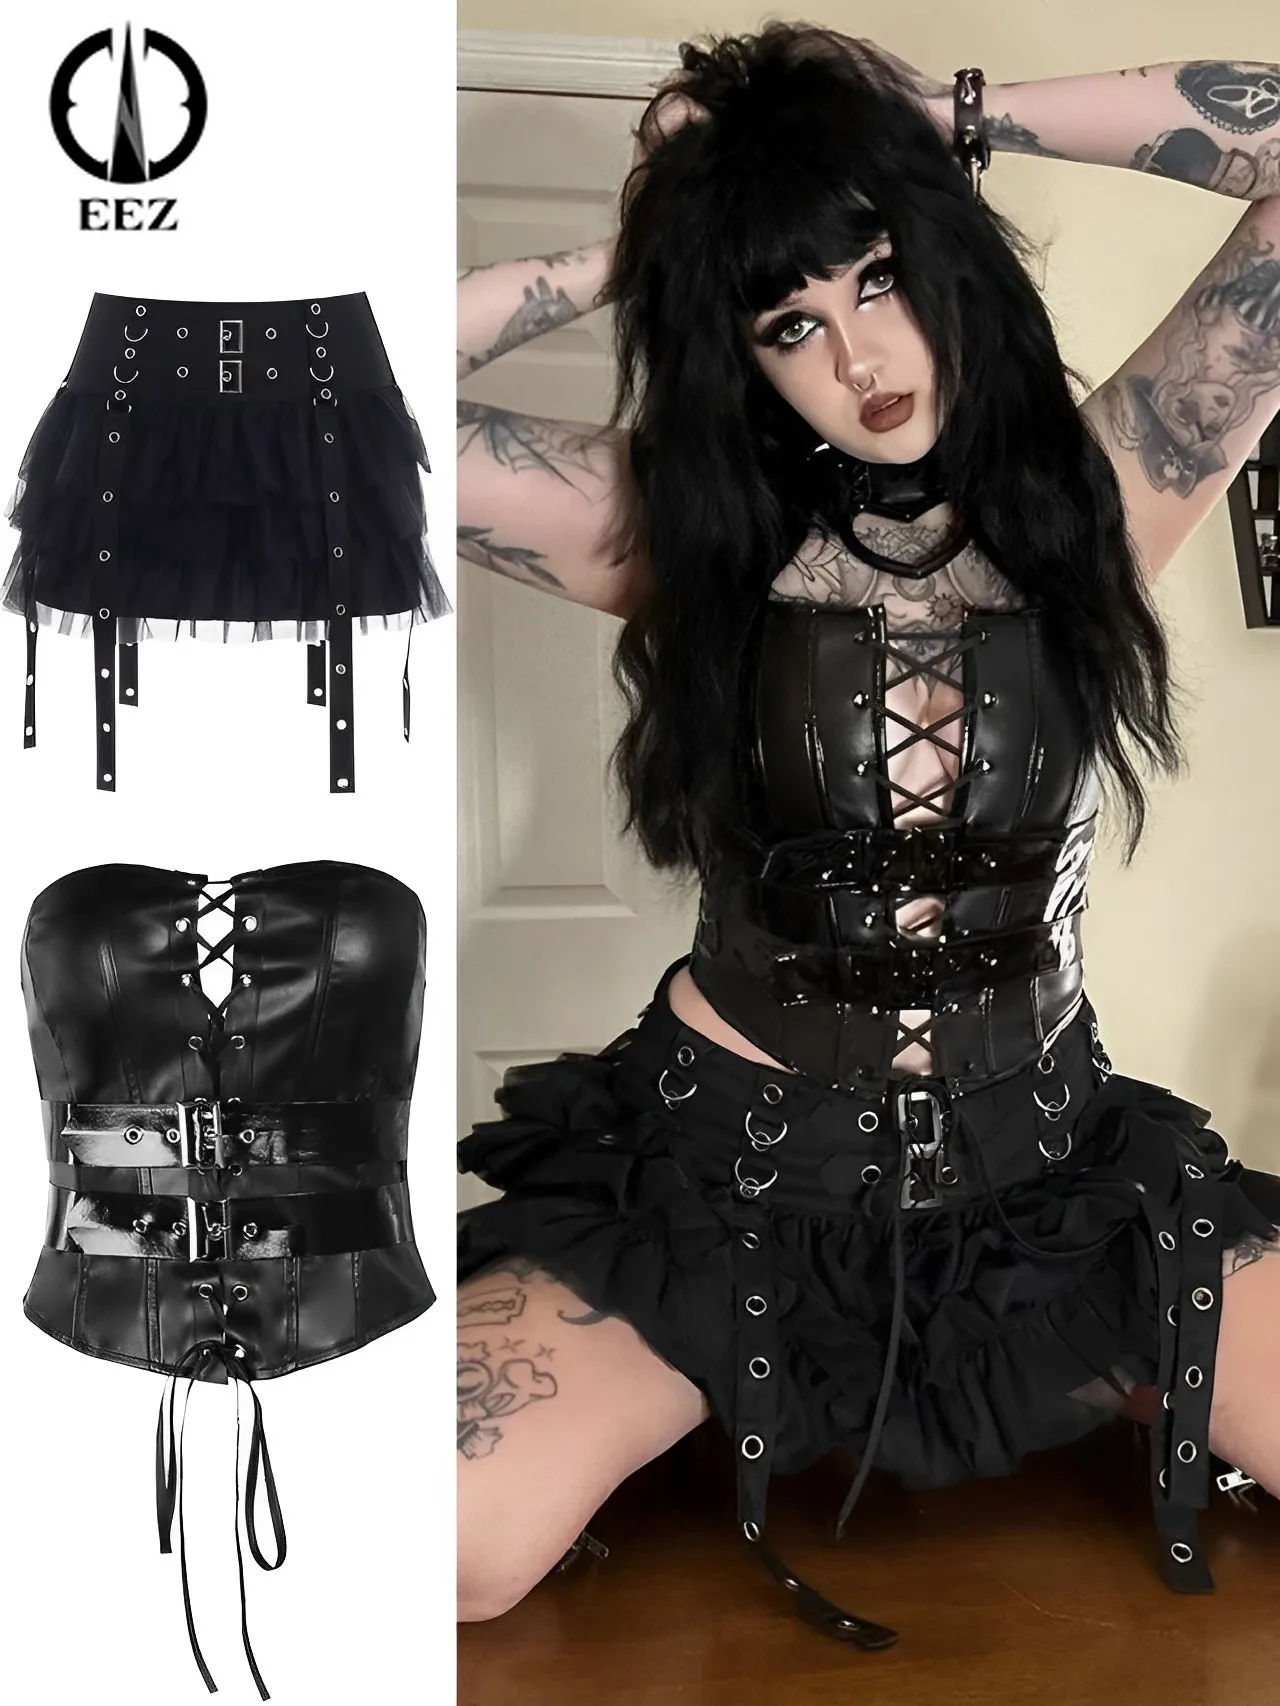 

Black Sexy Pleated Mini Skirt with Chain Women Punk High Waisted Goth Skirt E Girl Lace-Up Tie PU Leather Corset Y2K Crop Tops